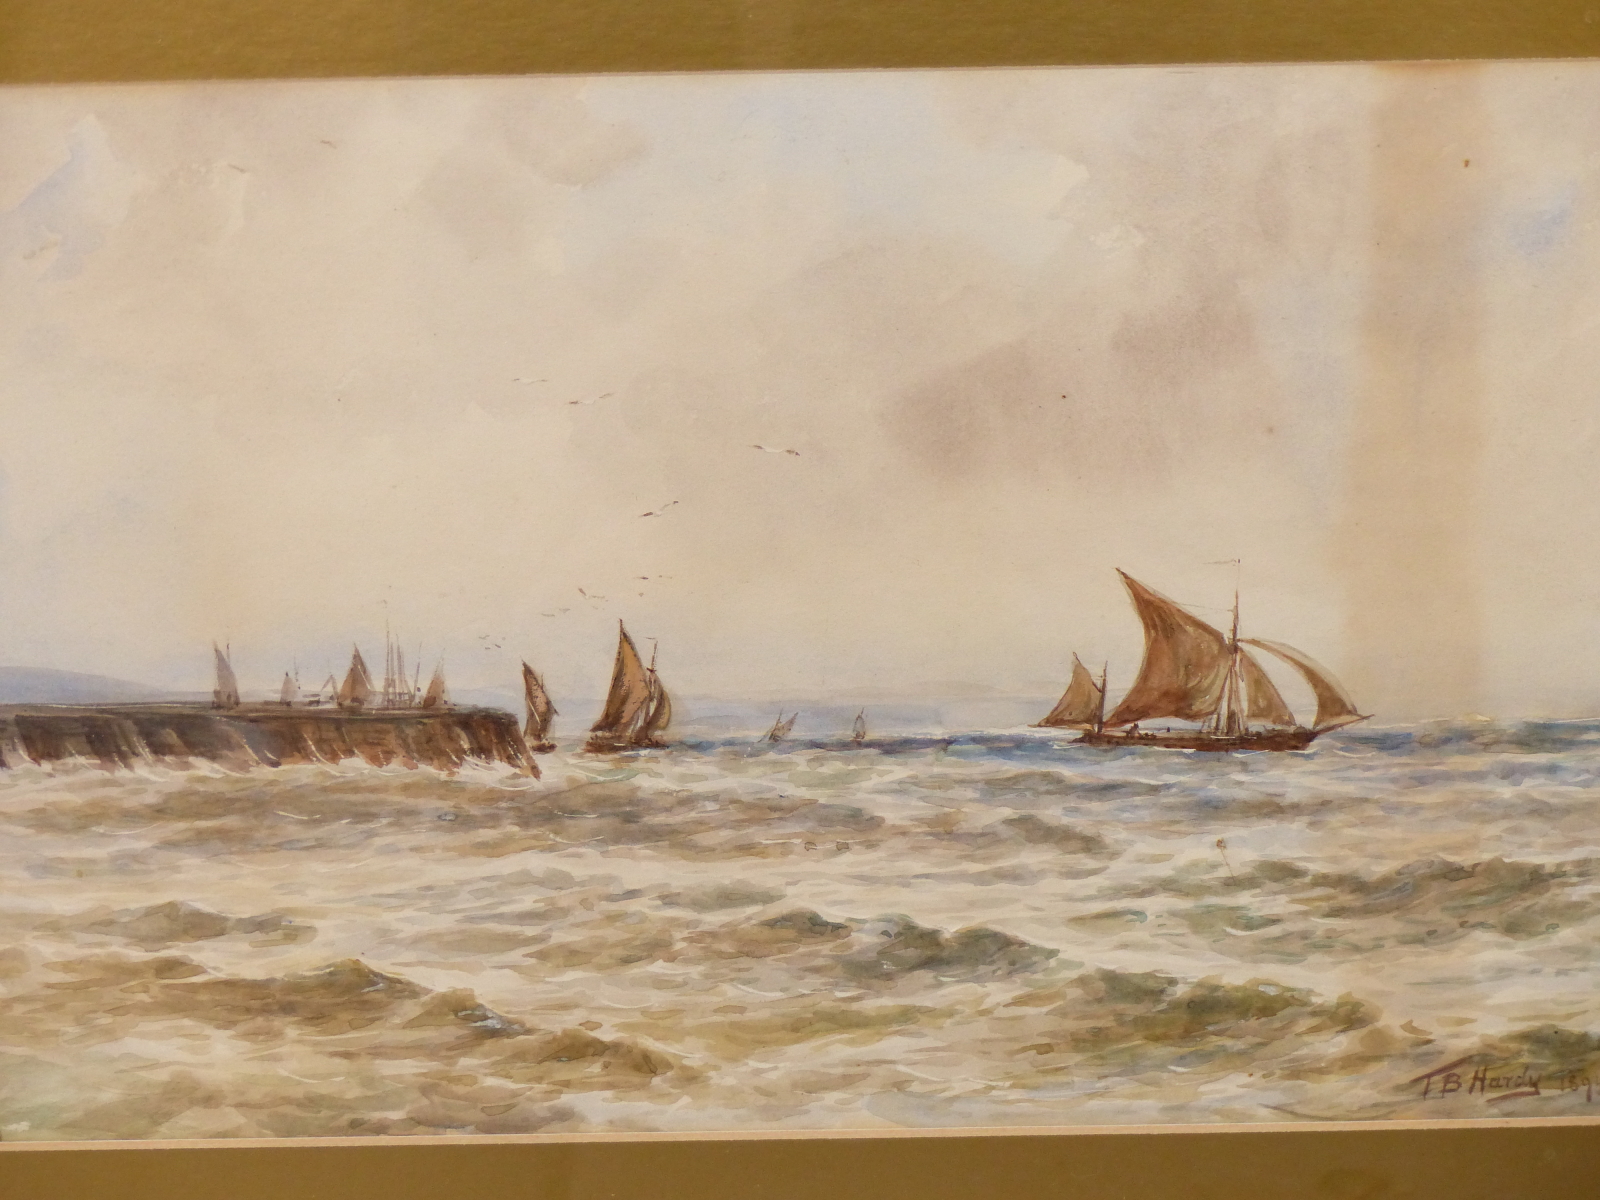 MANNER OF THOMAS BUSH HARDY (1842-1897), SAILING SHIPS IN CHOPPY SEAS, BEARS SIGNATURE AND DATE 1894 - Image 2 of 5